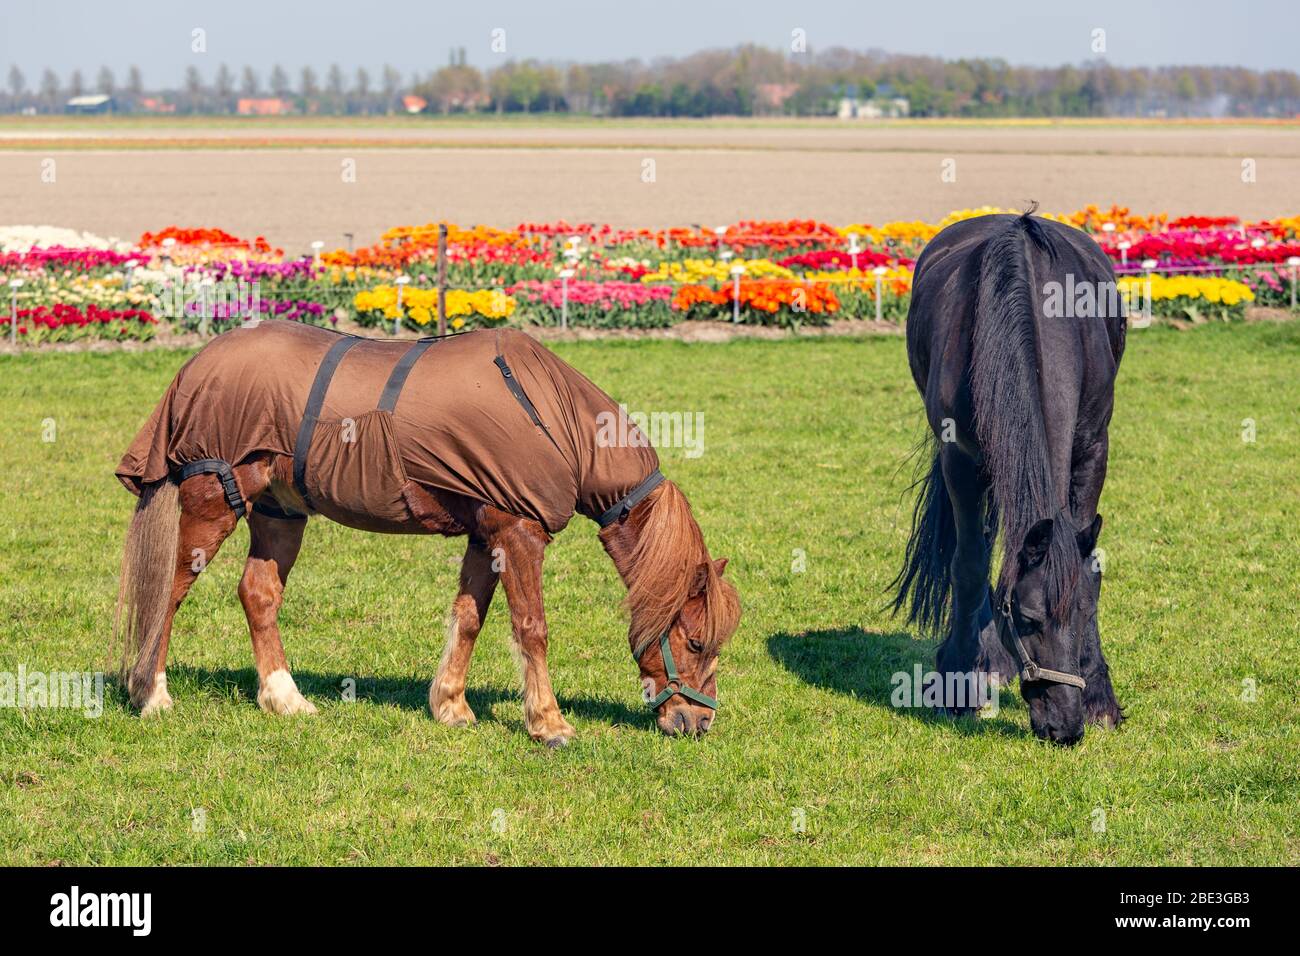 Two horses with blanket grazing near colorful dutch tulip garden Stock Photo